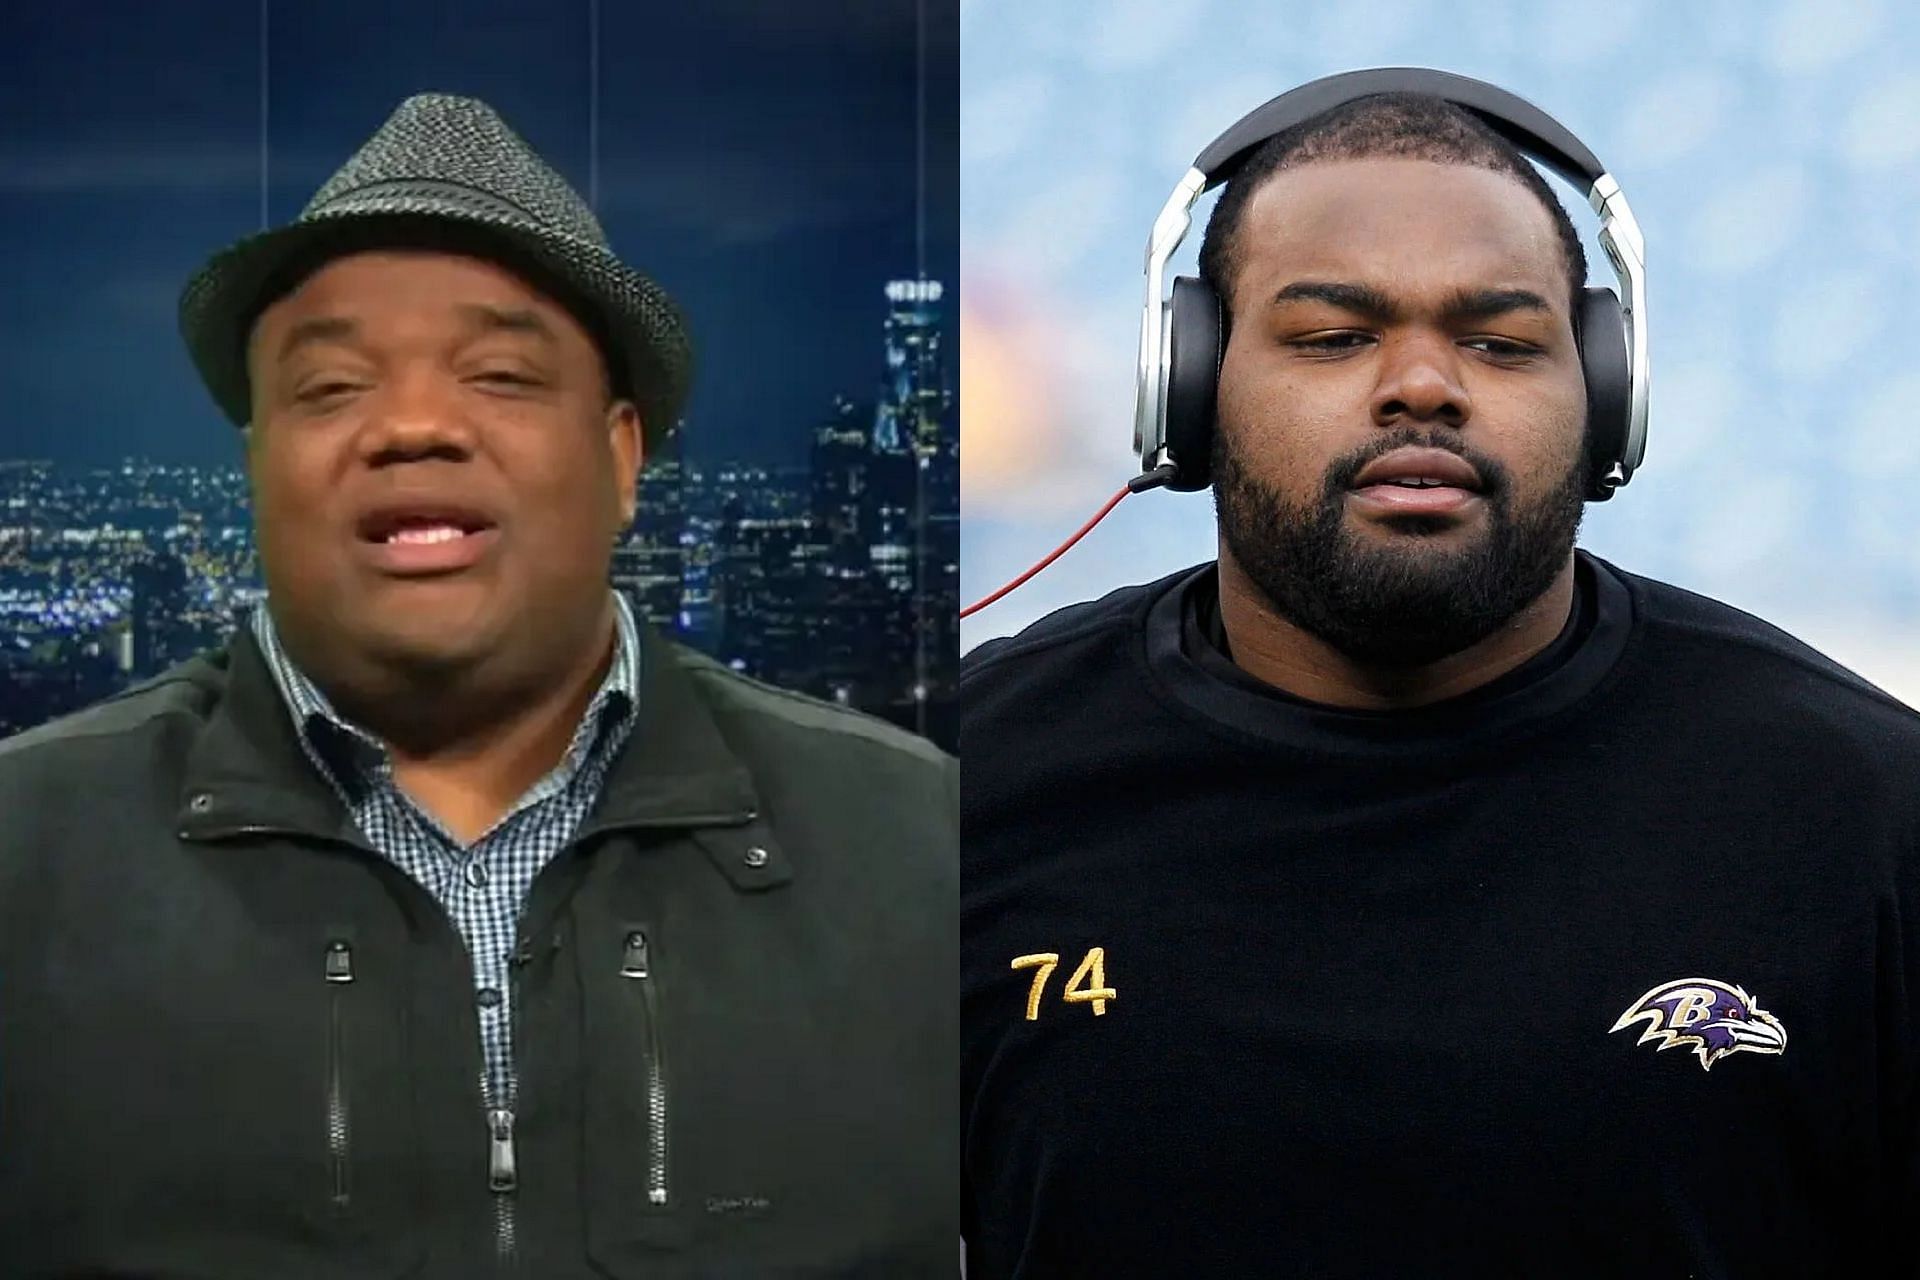 Jason Whitlock and Michael Oher (Pic Readjusted from Business Insider and Getty)